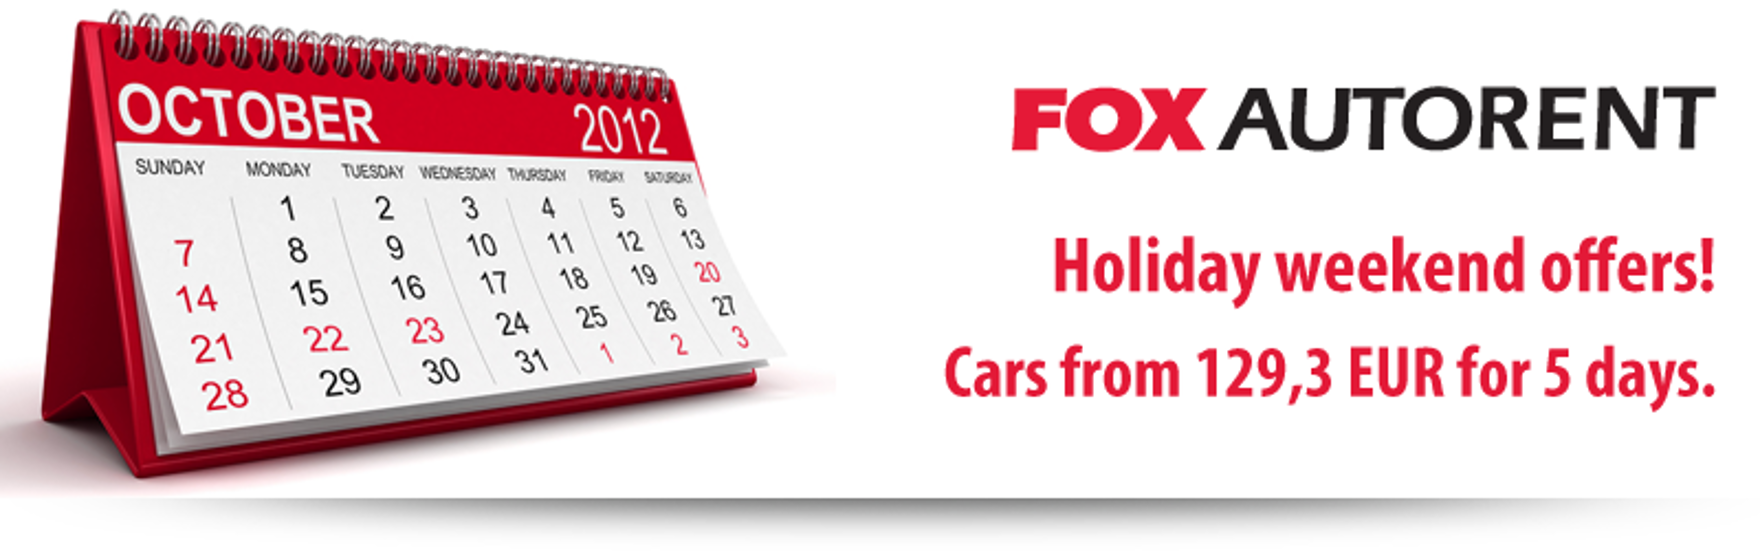 Revolutionary Offers From Fox Autorent For The Revolutionary Weekend